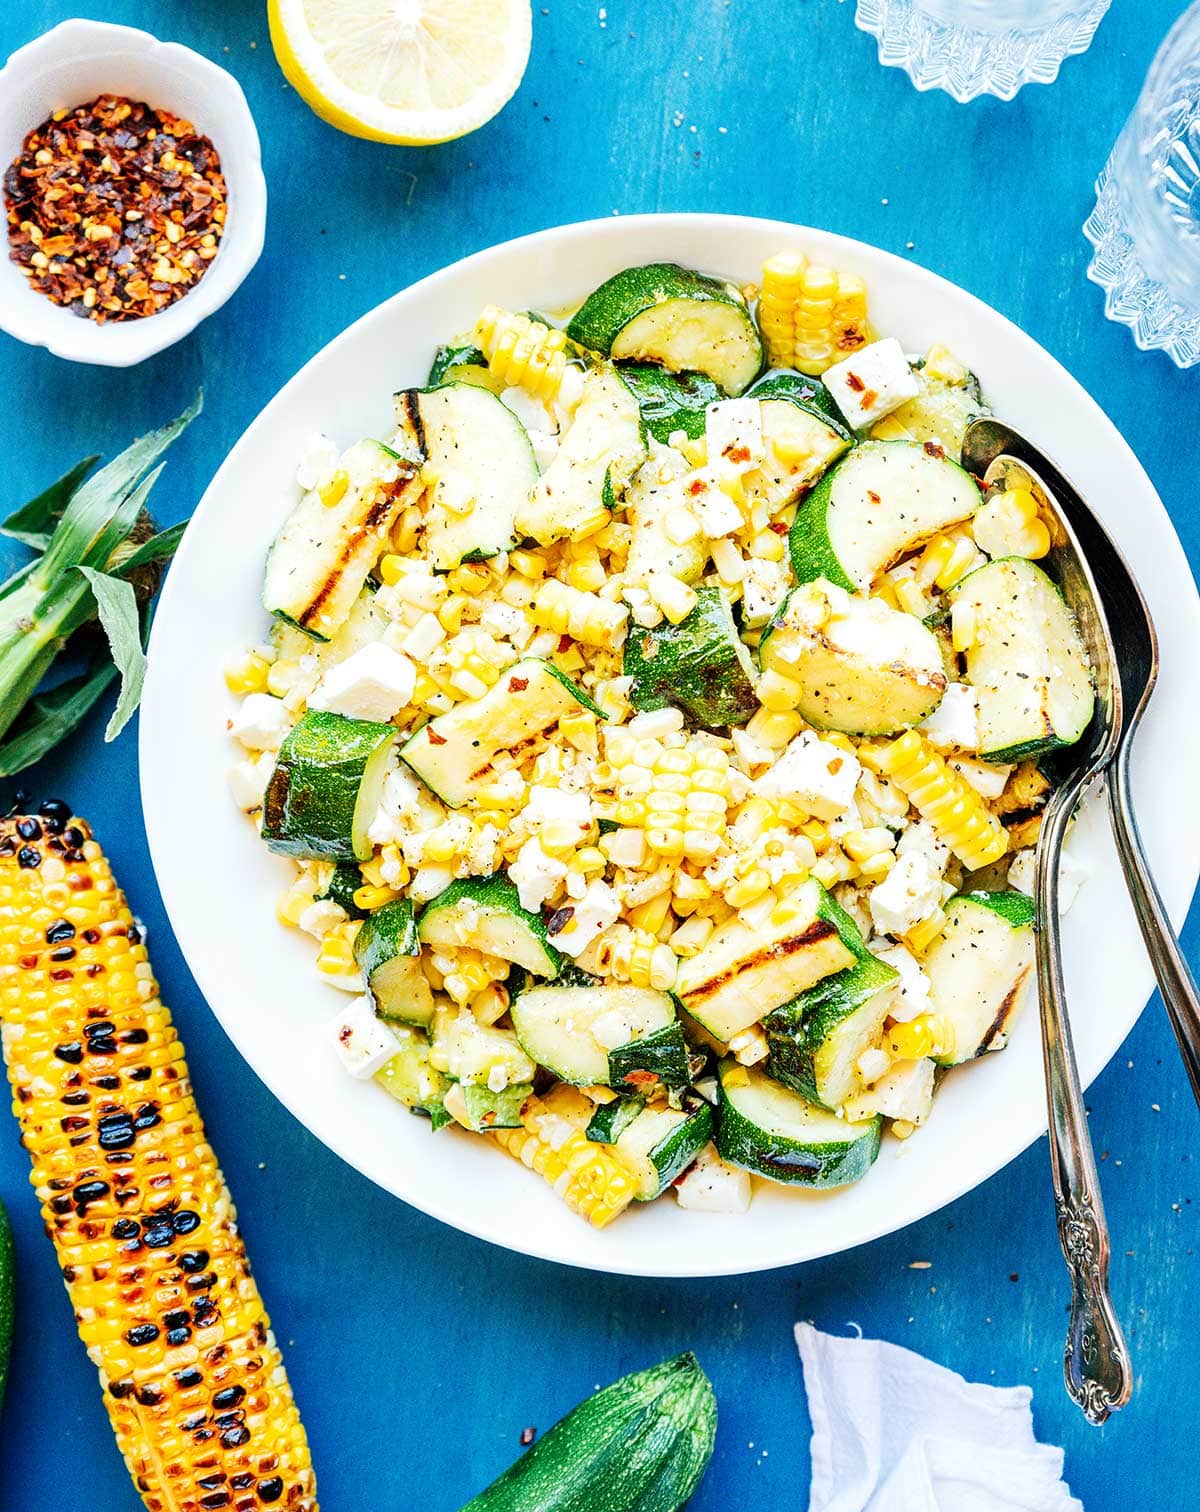 Zucchini corn salad on a white plate with serving spoons.